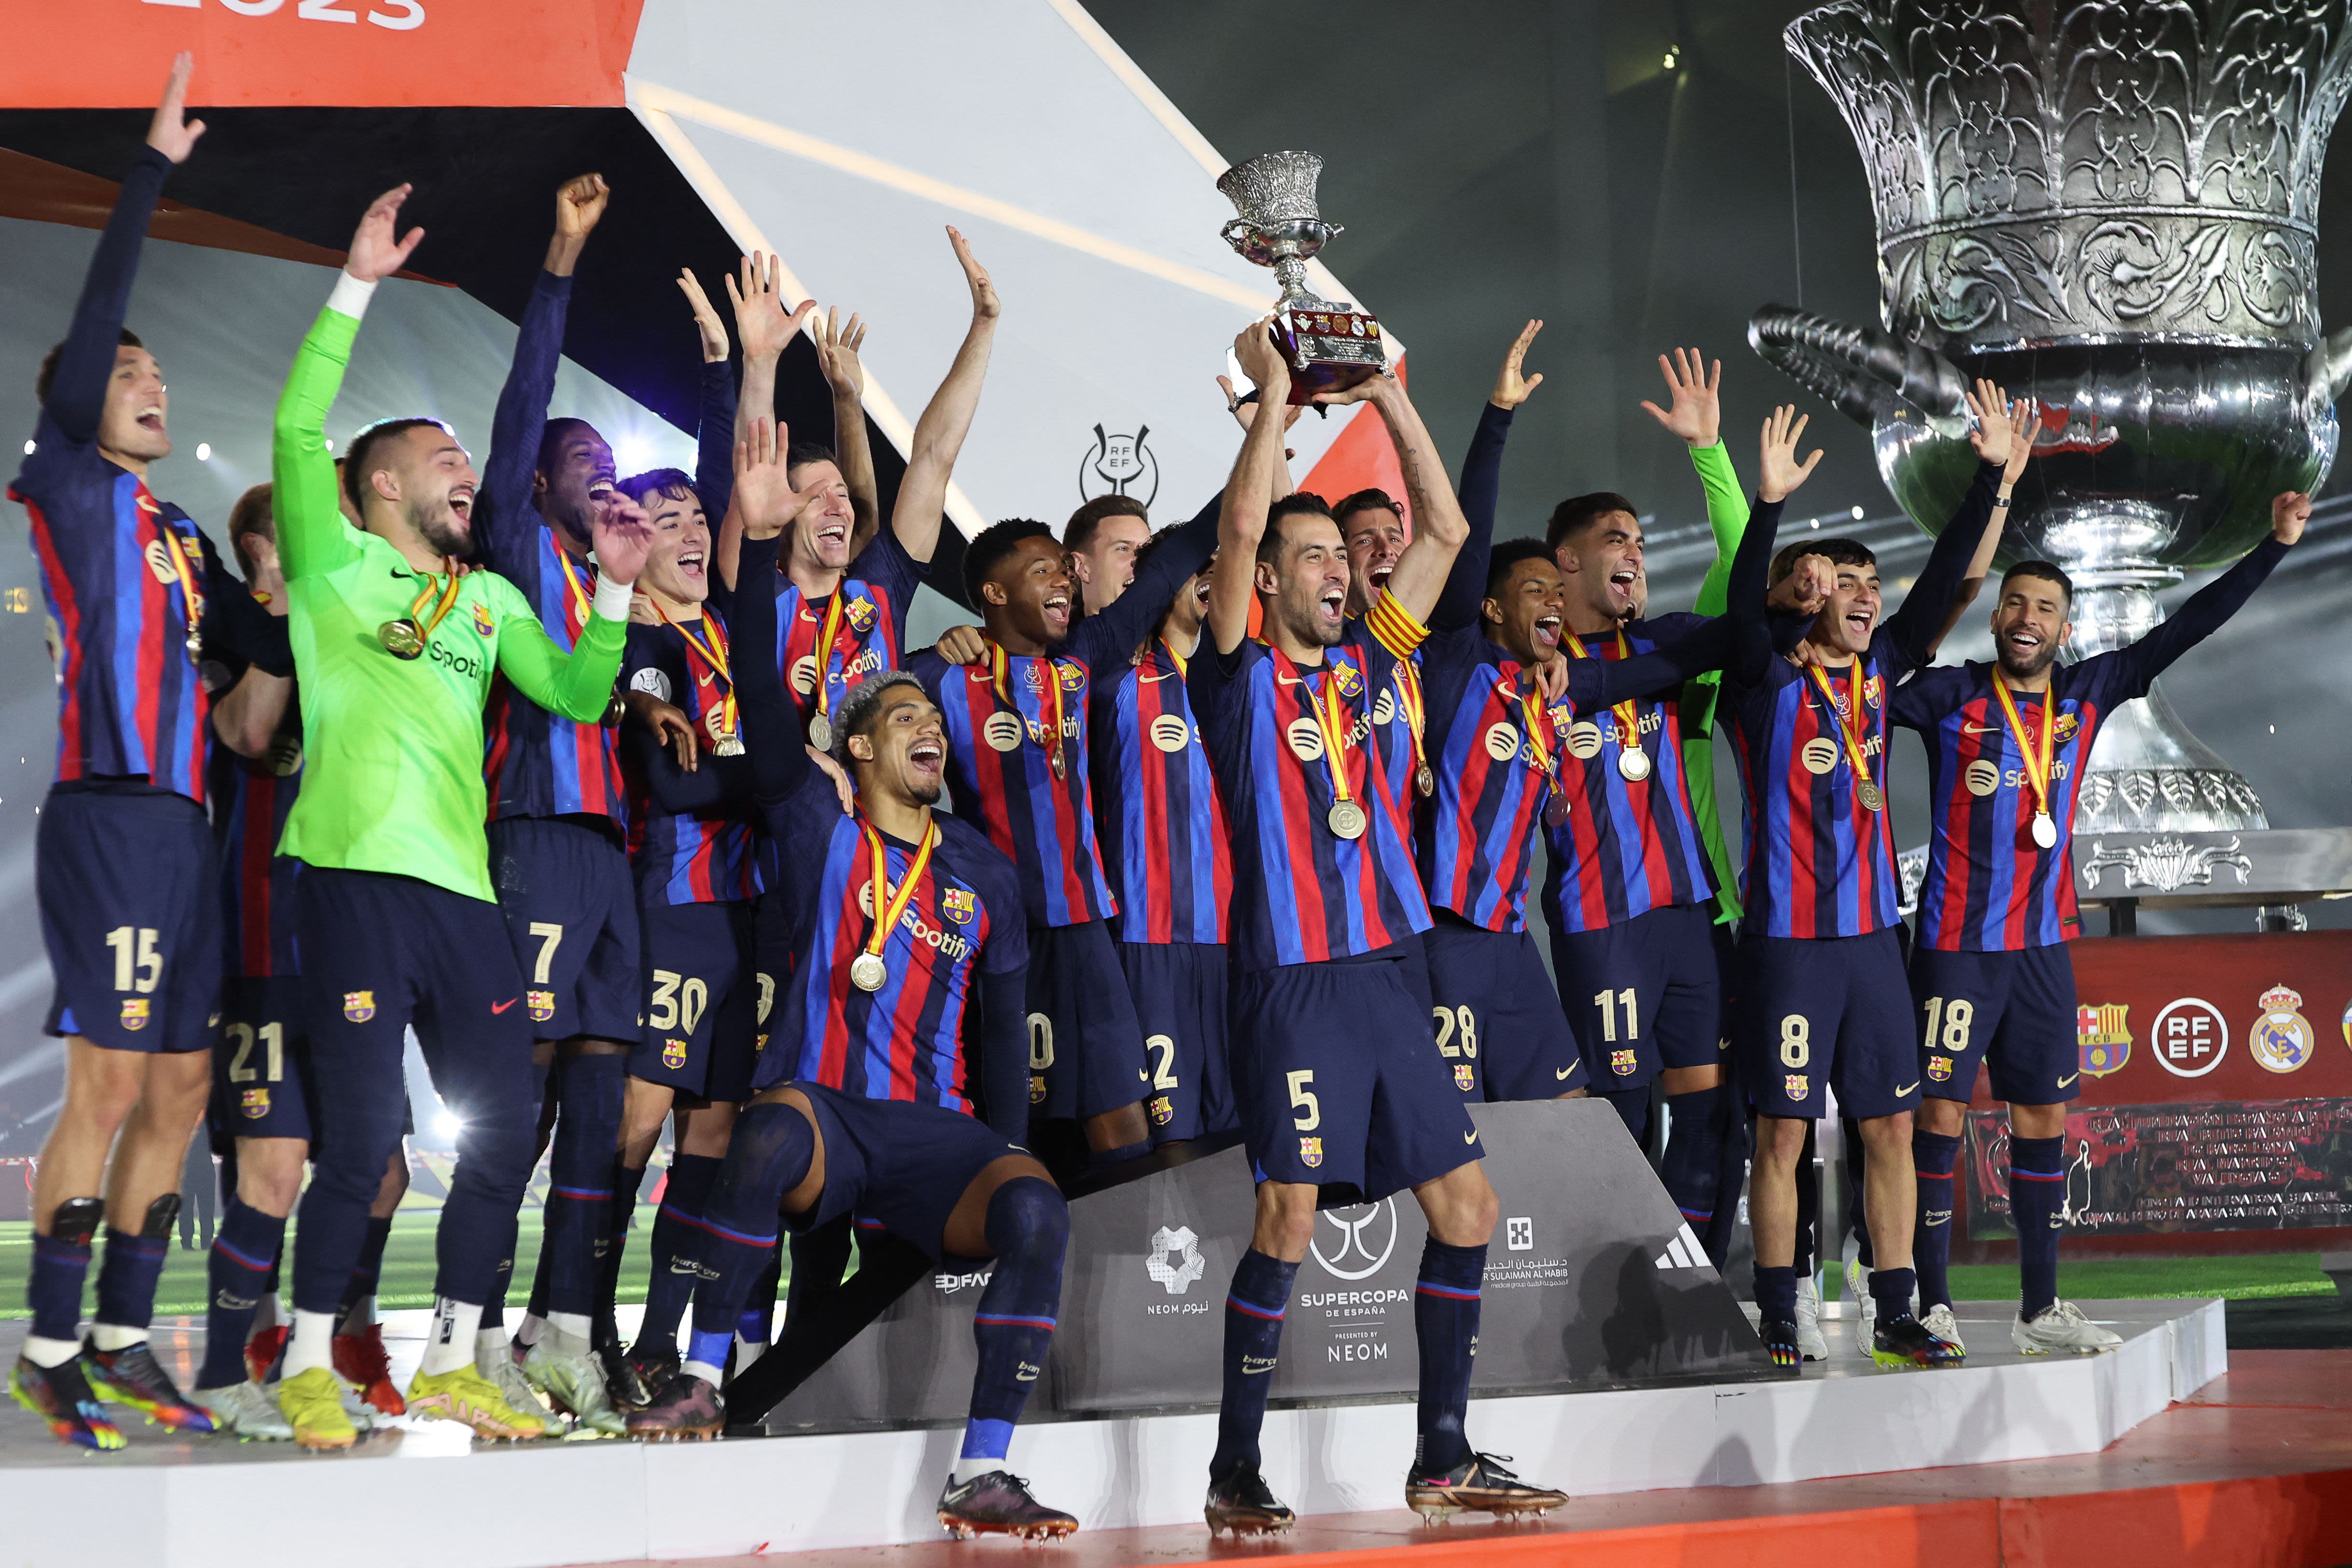 Barcelona wins Spanish Super Cup after beating Real Madrid 3-1 in final  hosted by Saudi Arabia | CNN